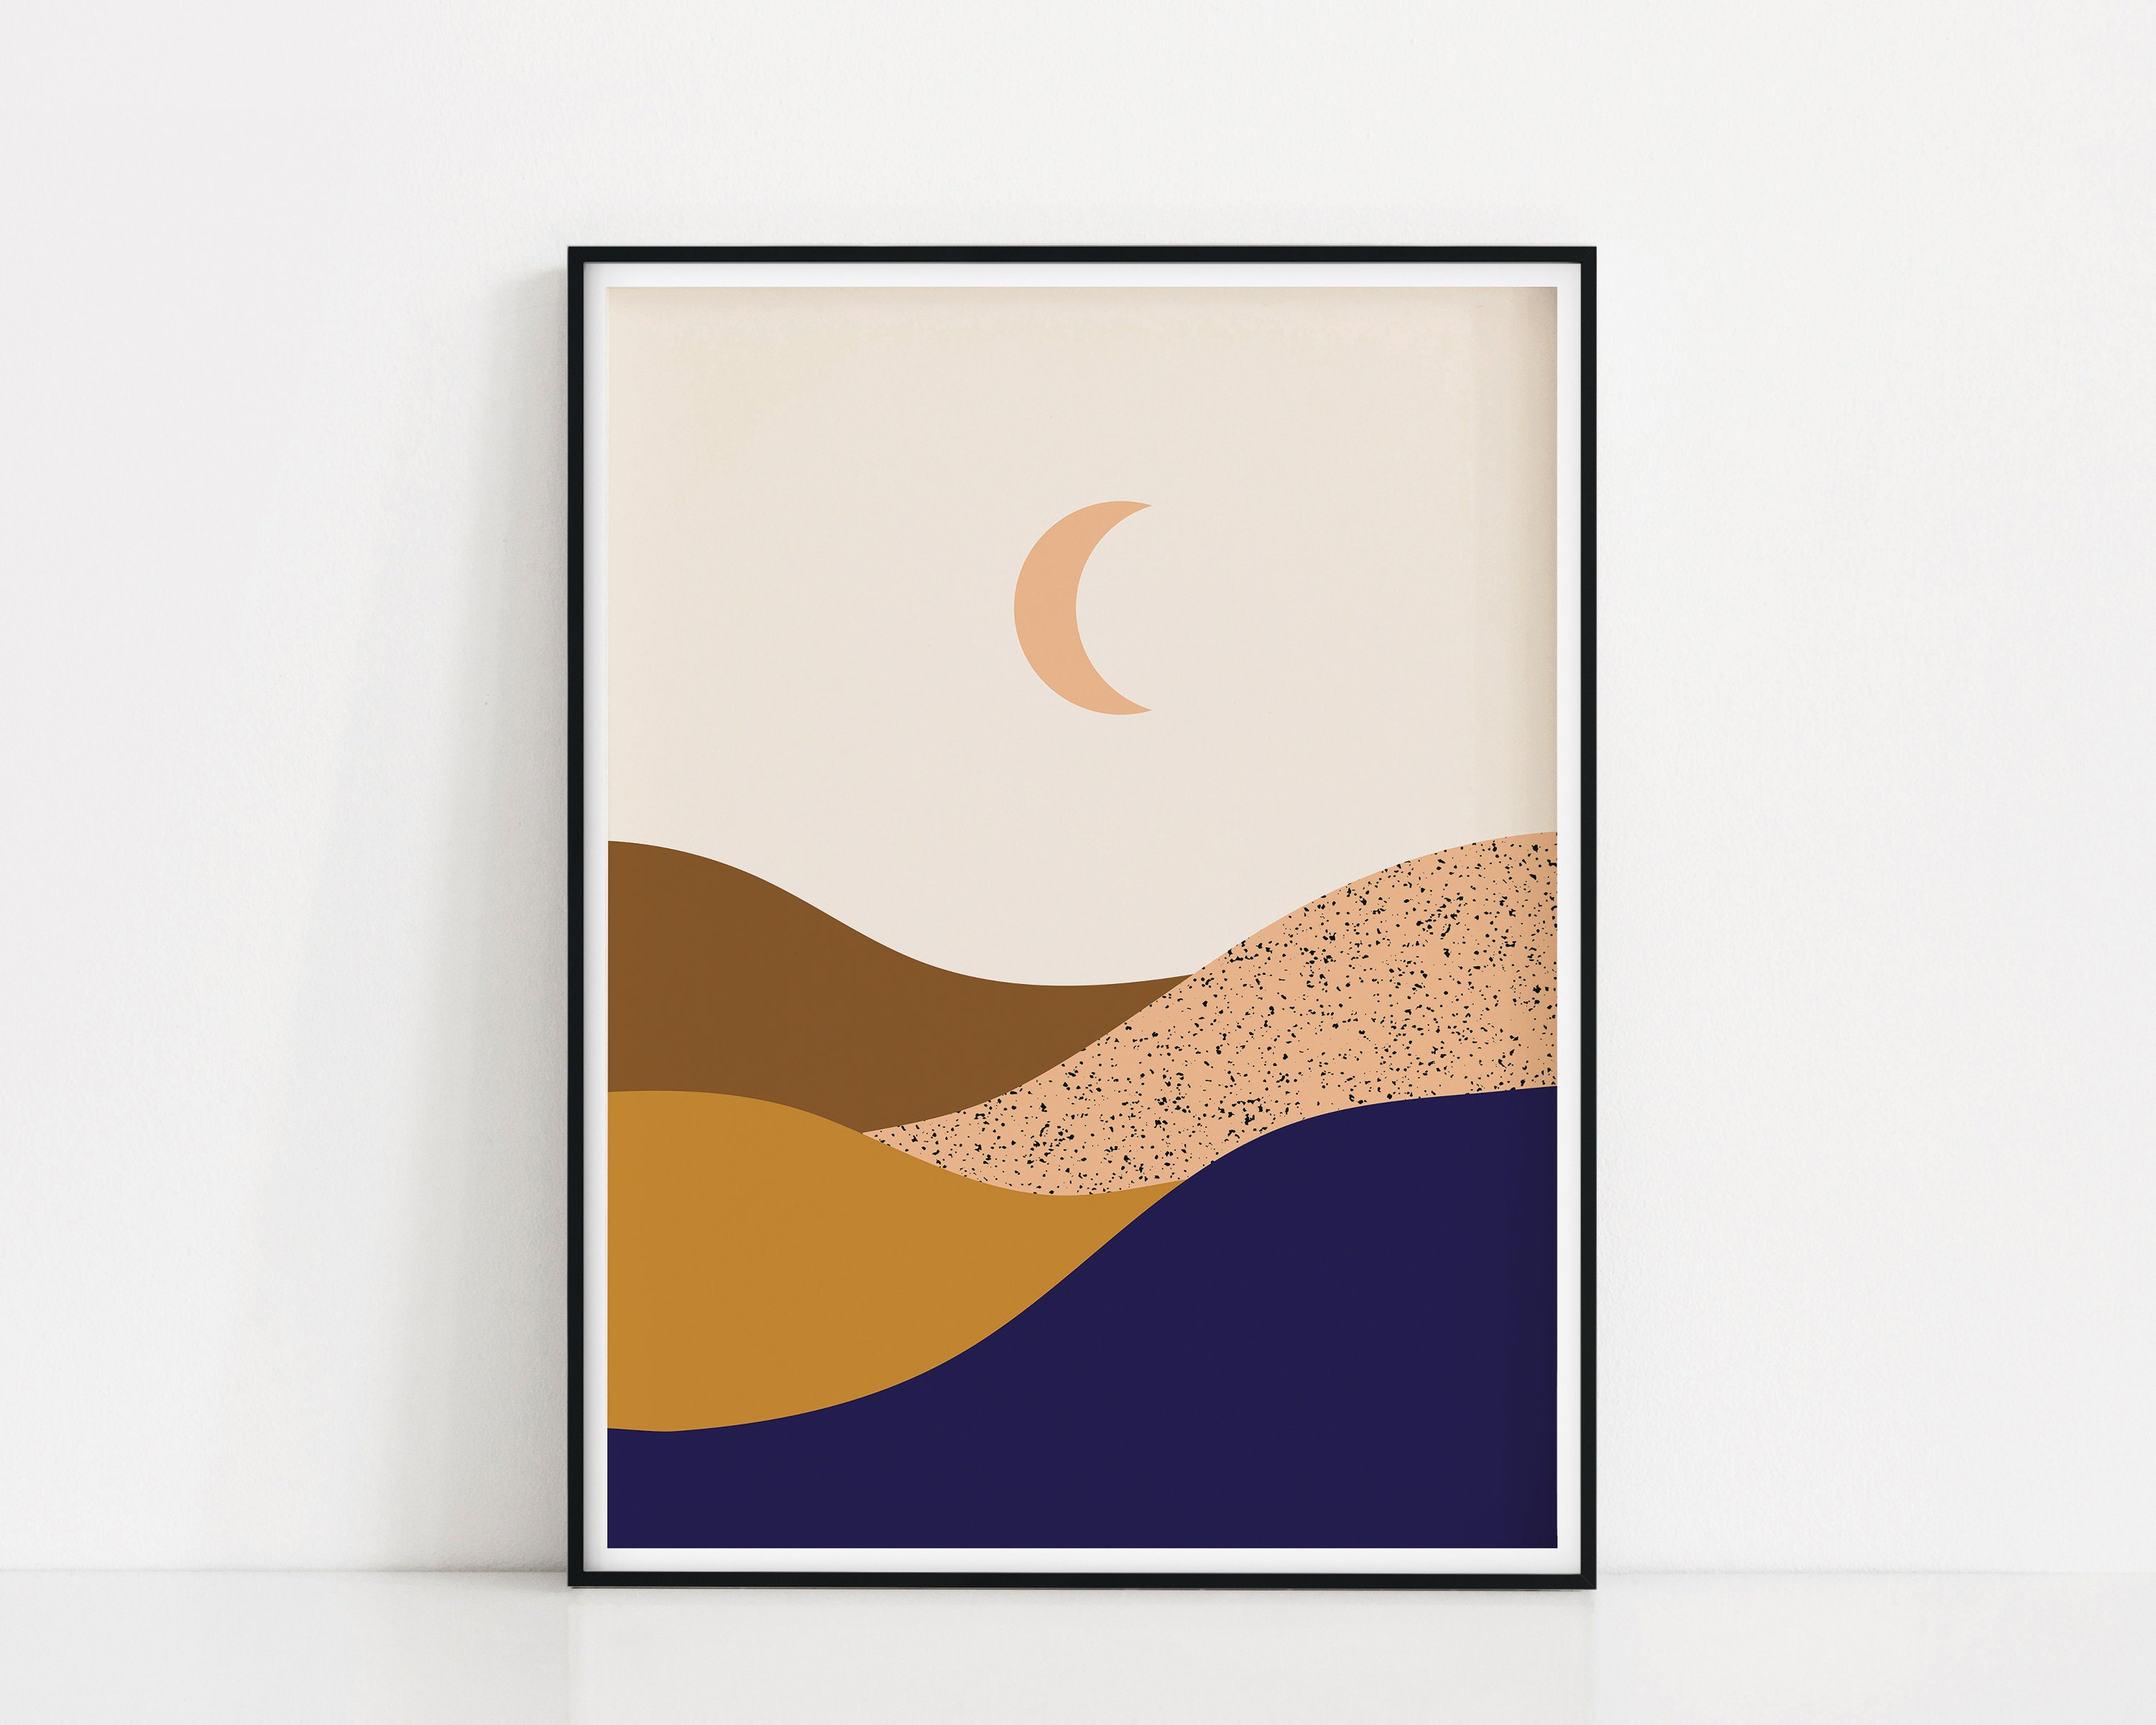 Abstract Celestial Crescent Moon PRINTABLE ART Or Poster Inspired By Retro Boho Chic Style For Your Home And Office